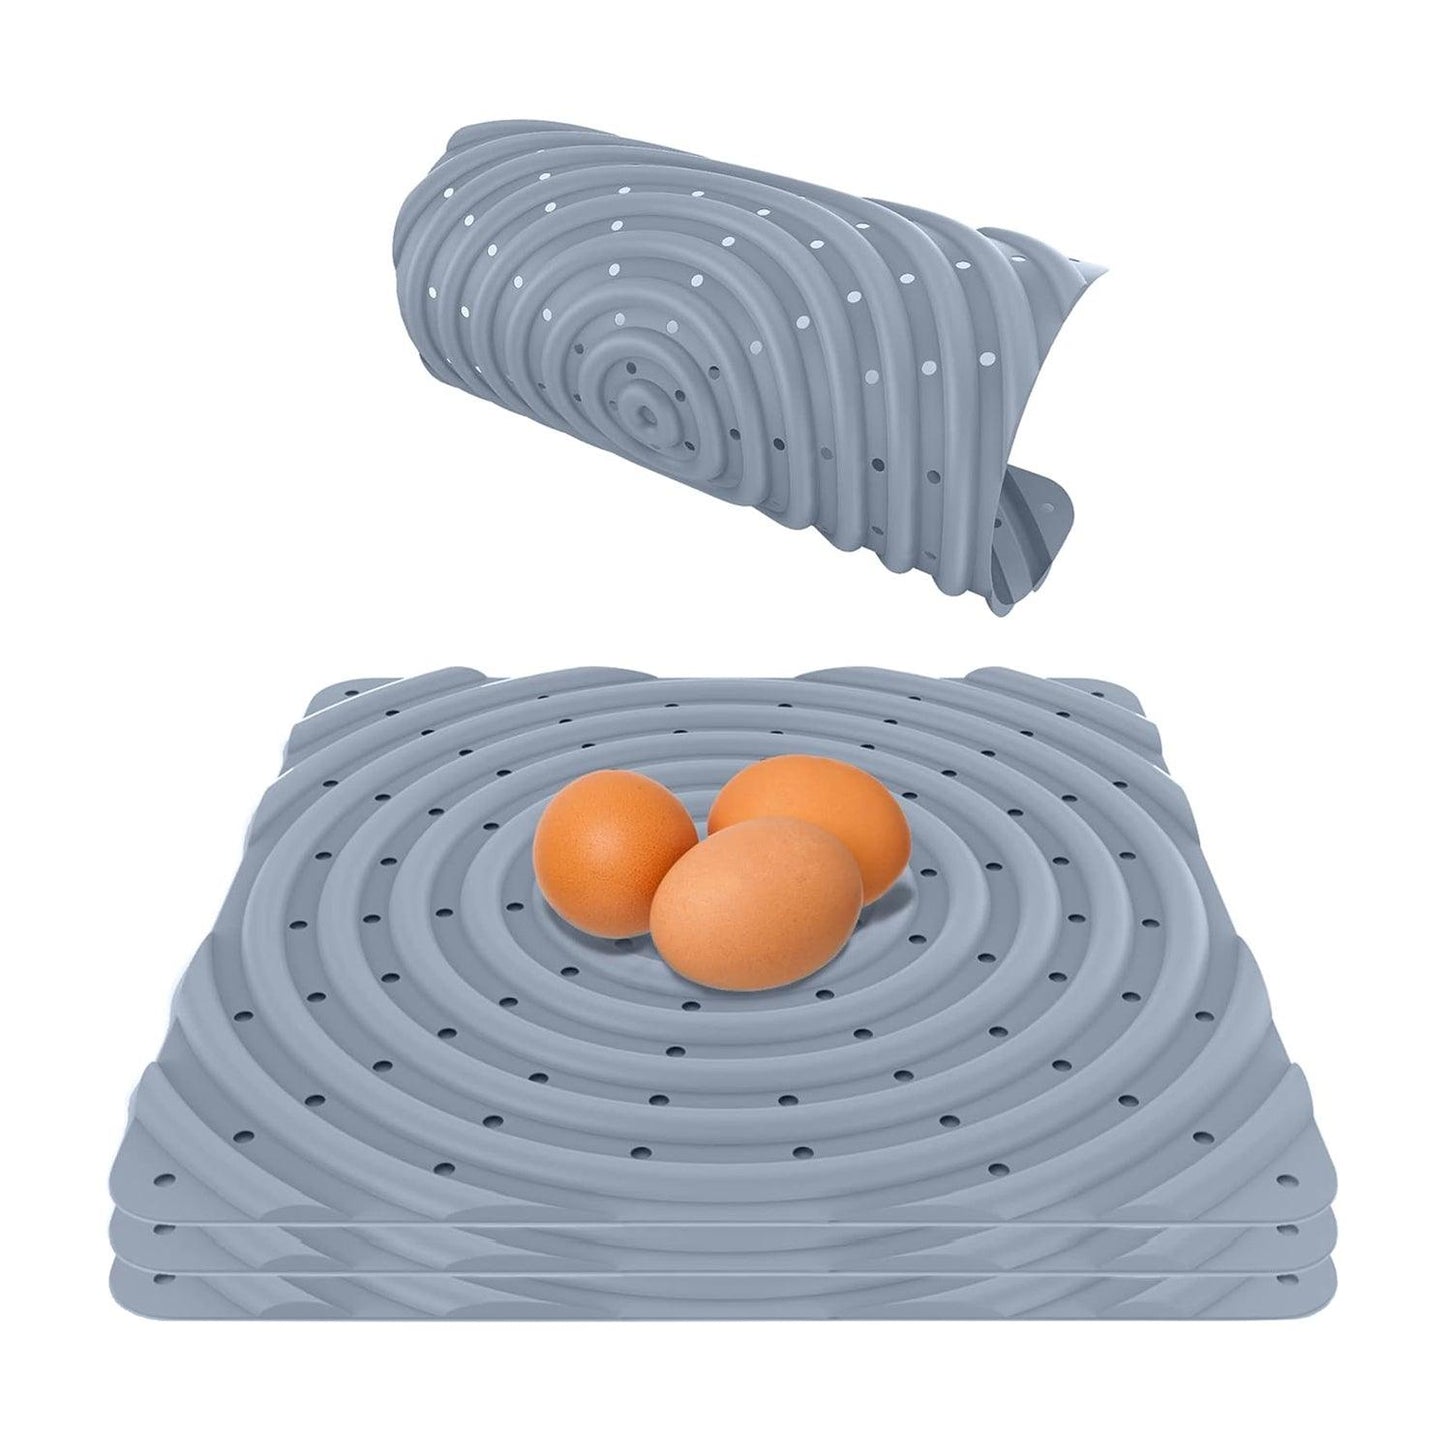 Washable Chicken Nesting Pads for Laying Eggs - Pack of 4 (Gray) - Lil'Clucker